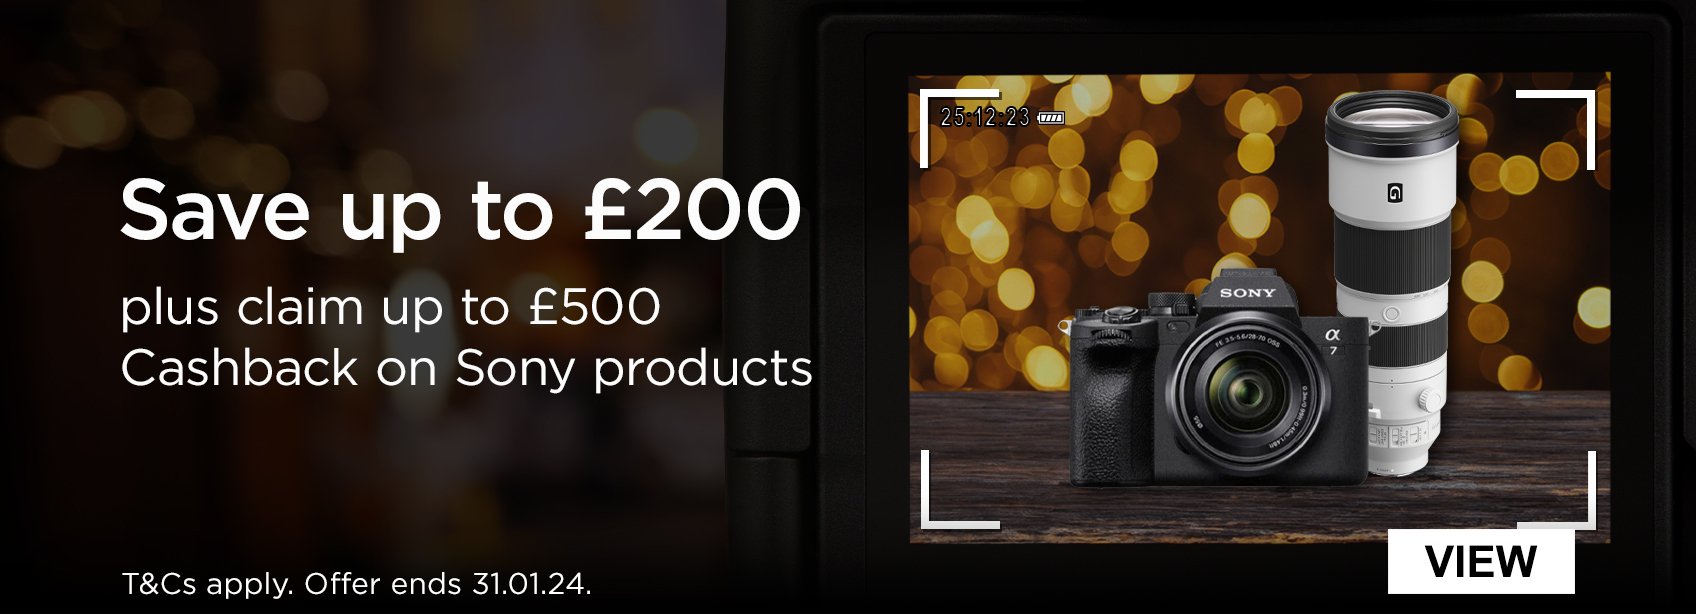 Save up to £200, plus claim up to £500 cashback on sony products. t's and c's apply. offer ends 31.1.24